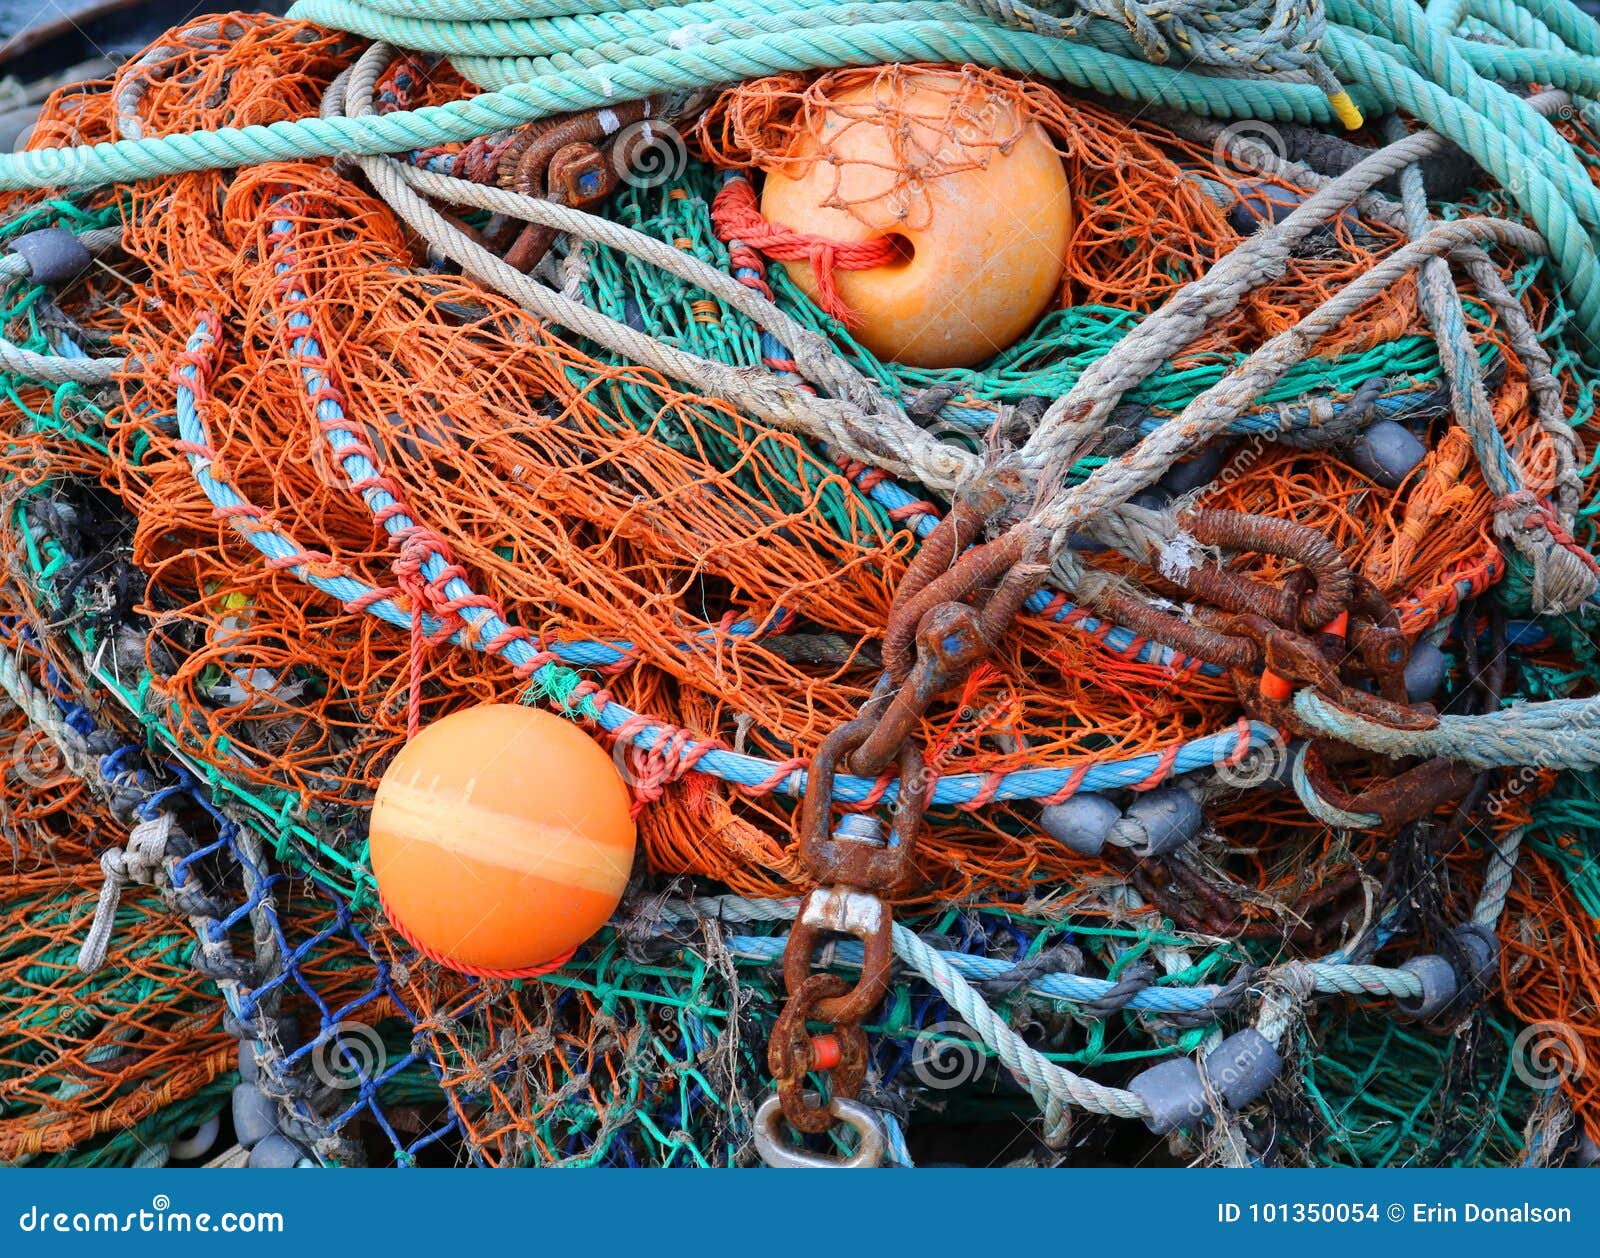 Close Up Pile of Colorful Fish Nets and Buoys Stock Photo - Image